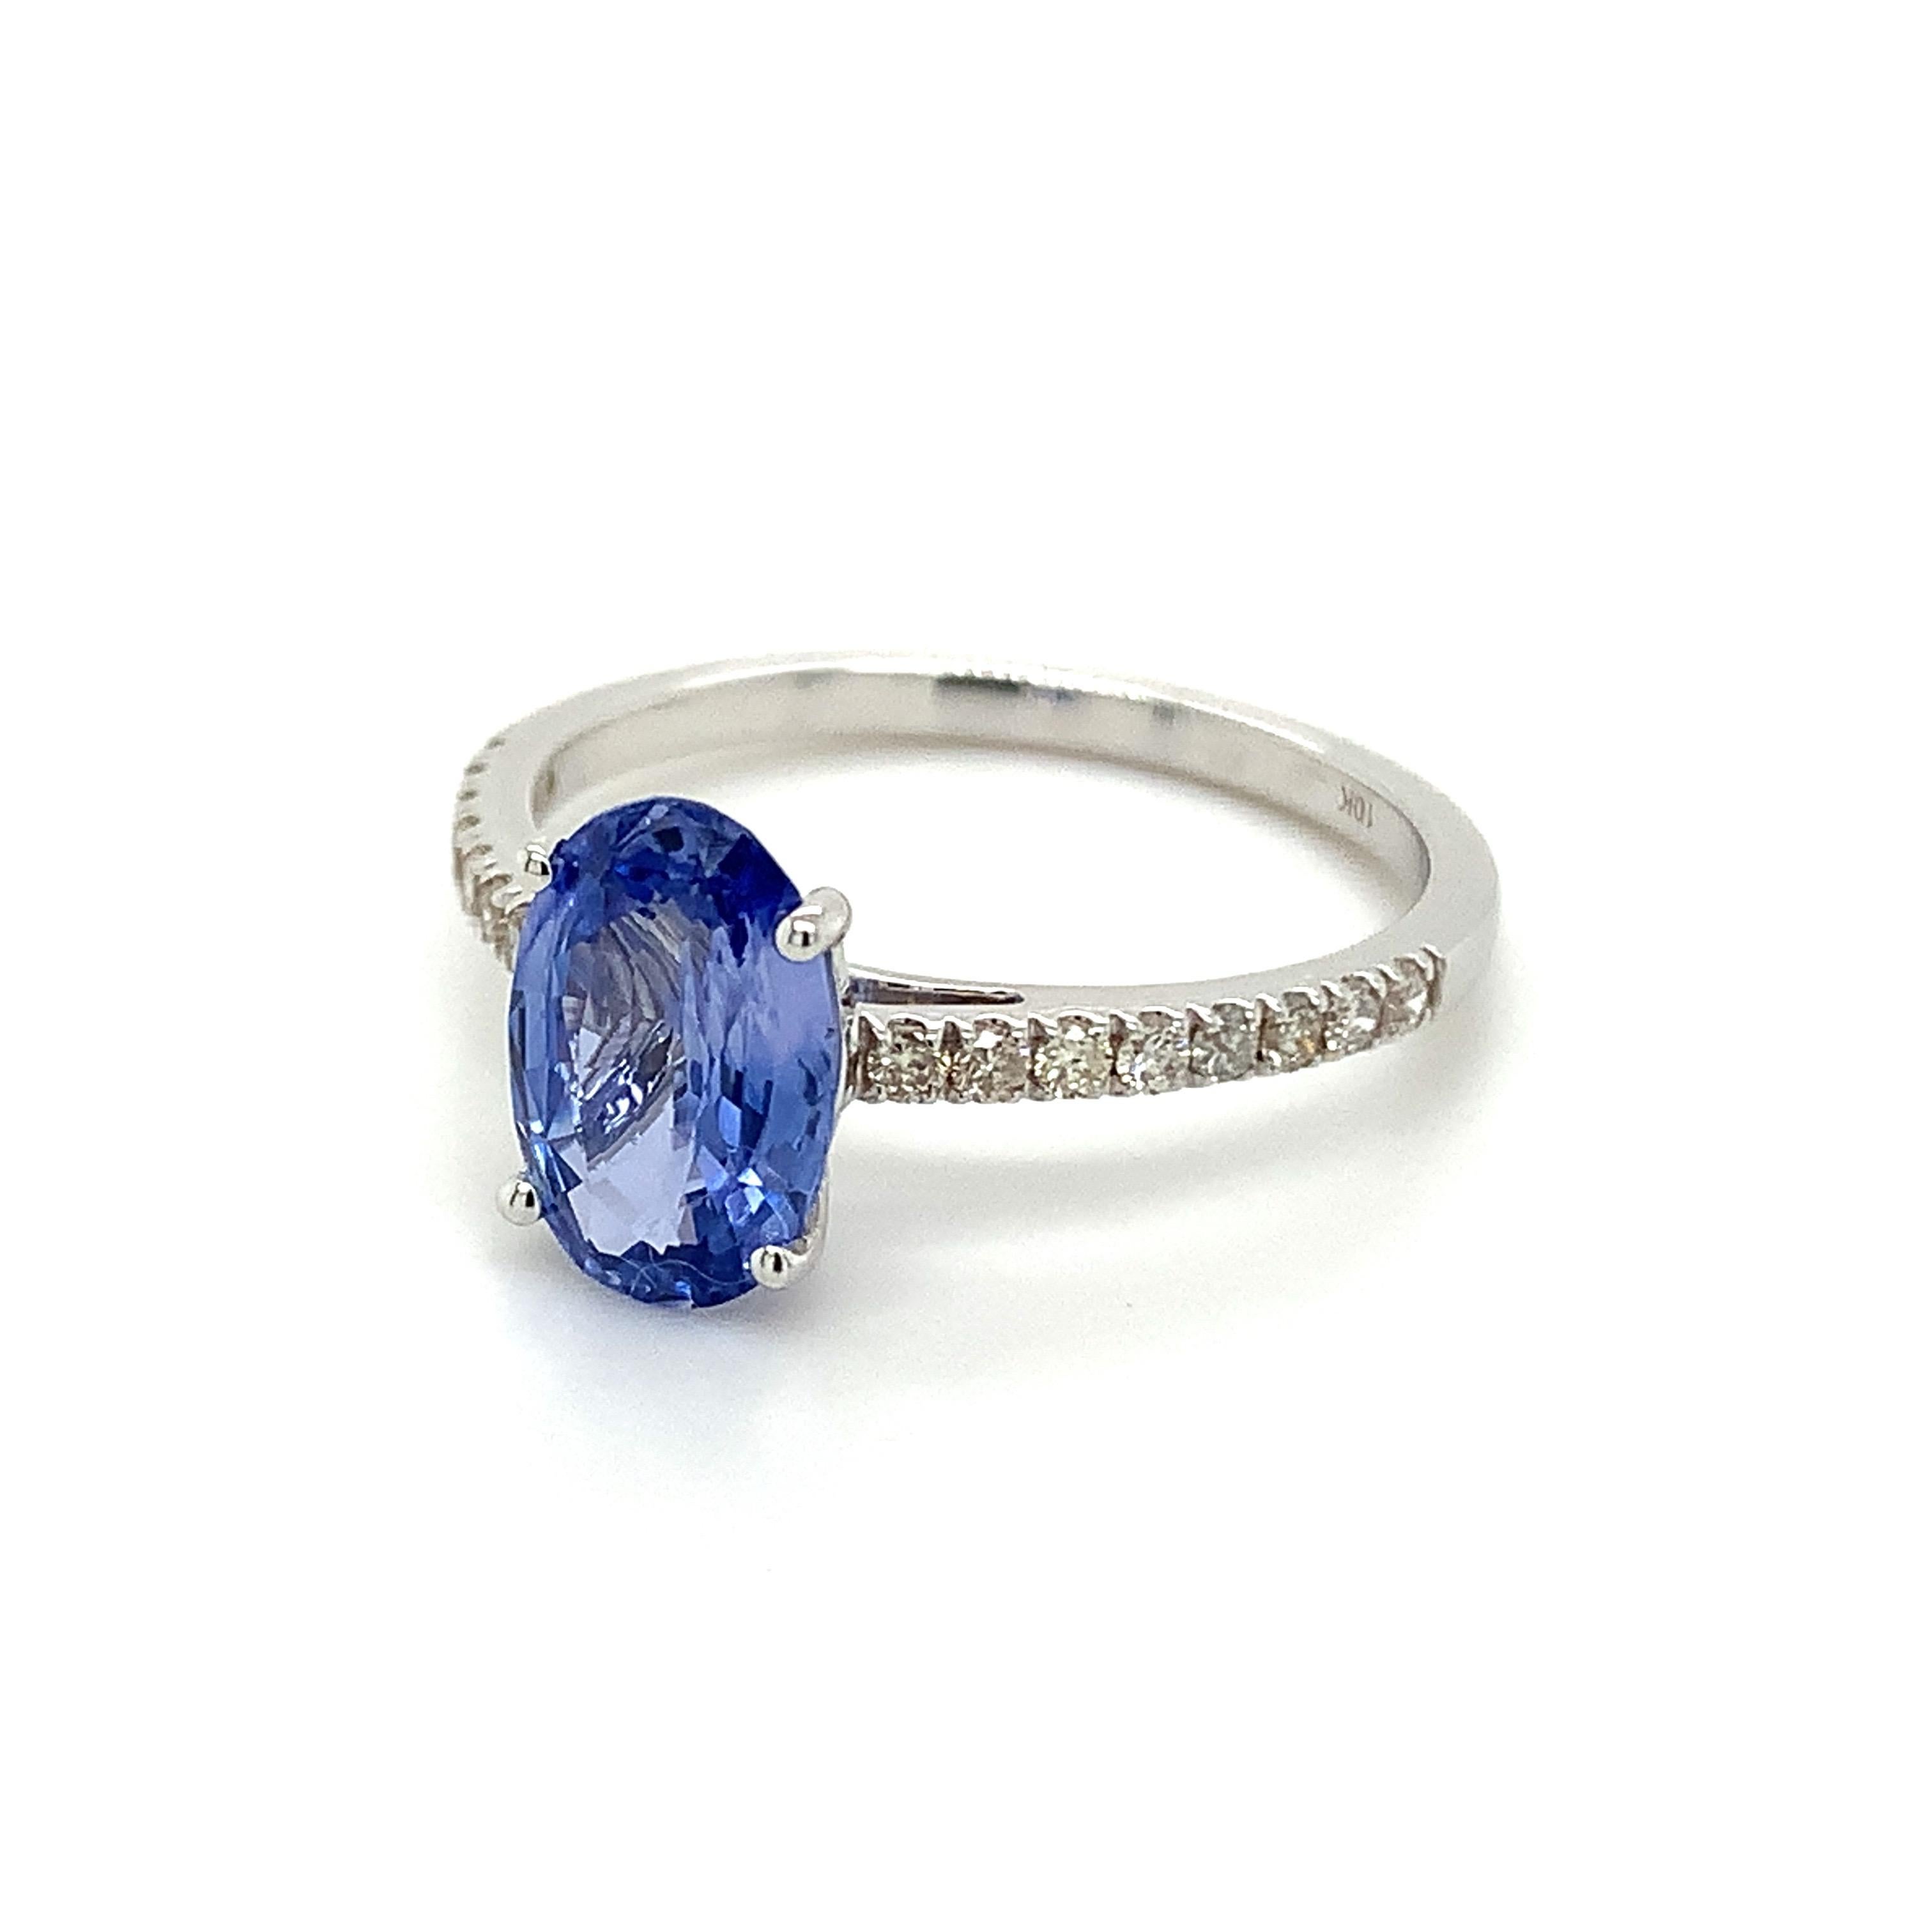 Oval shape blue sapphire gemstone beautifully crafted in a 10K white gold ring with natural diamonds.

A highly precious September birthstone with a delighting blue color. They are believed to bring good luck & fortune in life. Explore a vast range